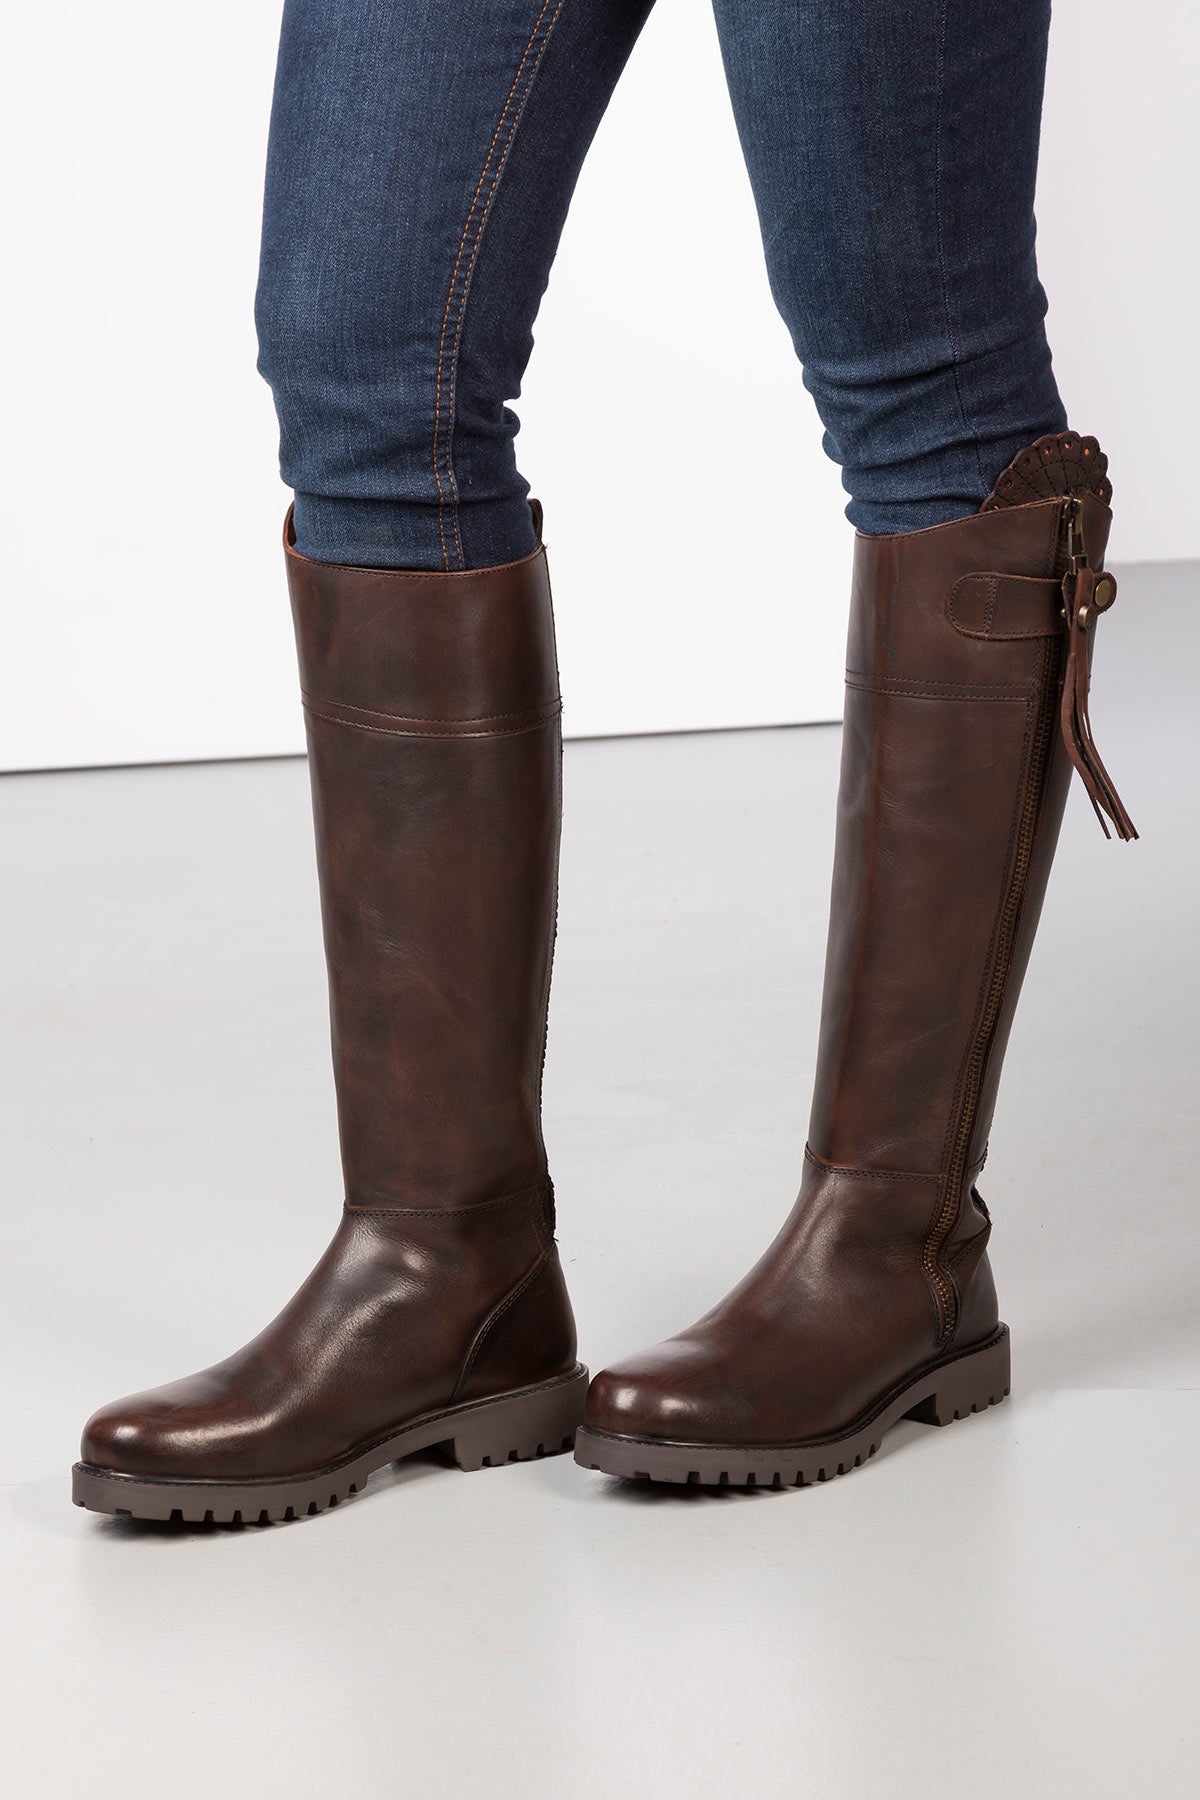 Ladies Tall Leather Country Boots UK | Knee High Boots | Rydale